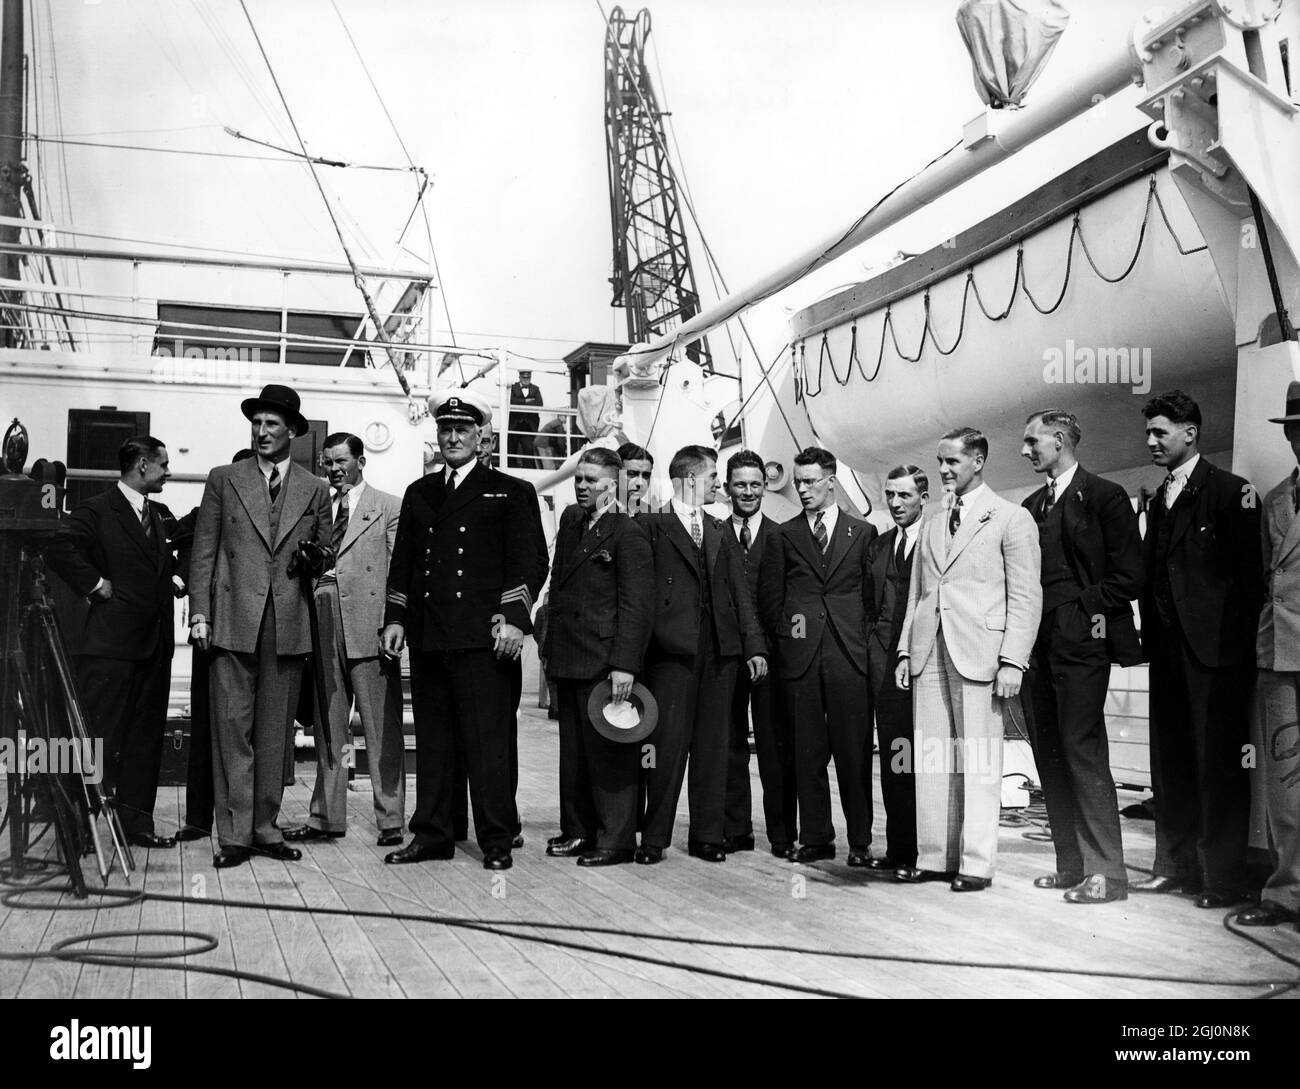 The 1932 England Test Cricket Team ready to leave Tilbury Docks, London, England. Douglas Jardine (captain) is shown on the left wearing a hat. The 1932-3 Ashes series was infamous for Jardine's leg theory, otherwise known as Bodyline. 17 September 1932 ©Topham - TopFoto Stock Photo